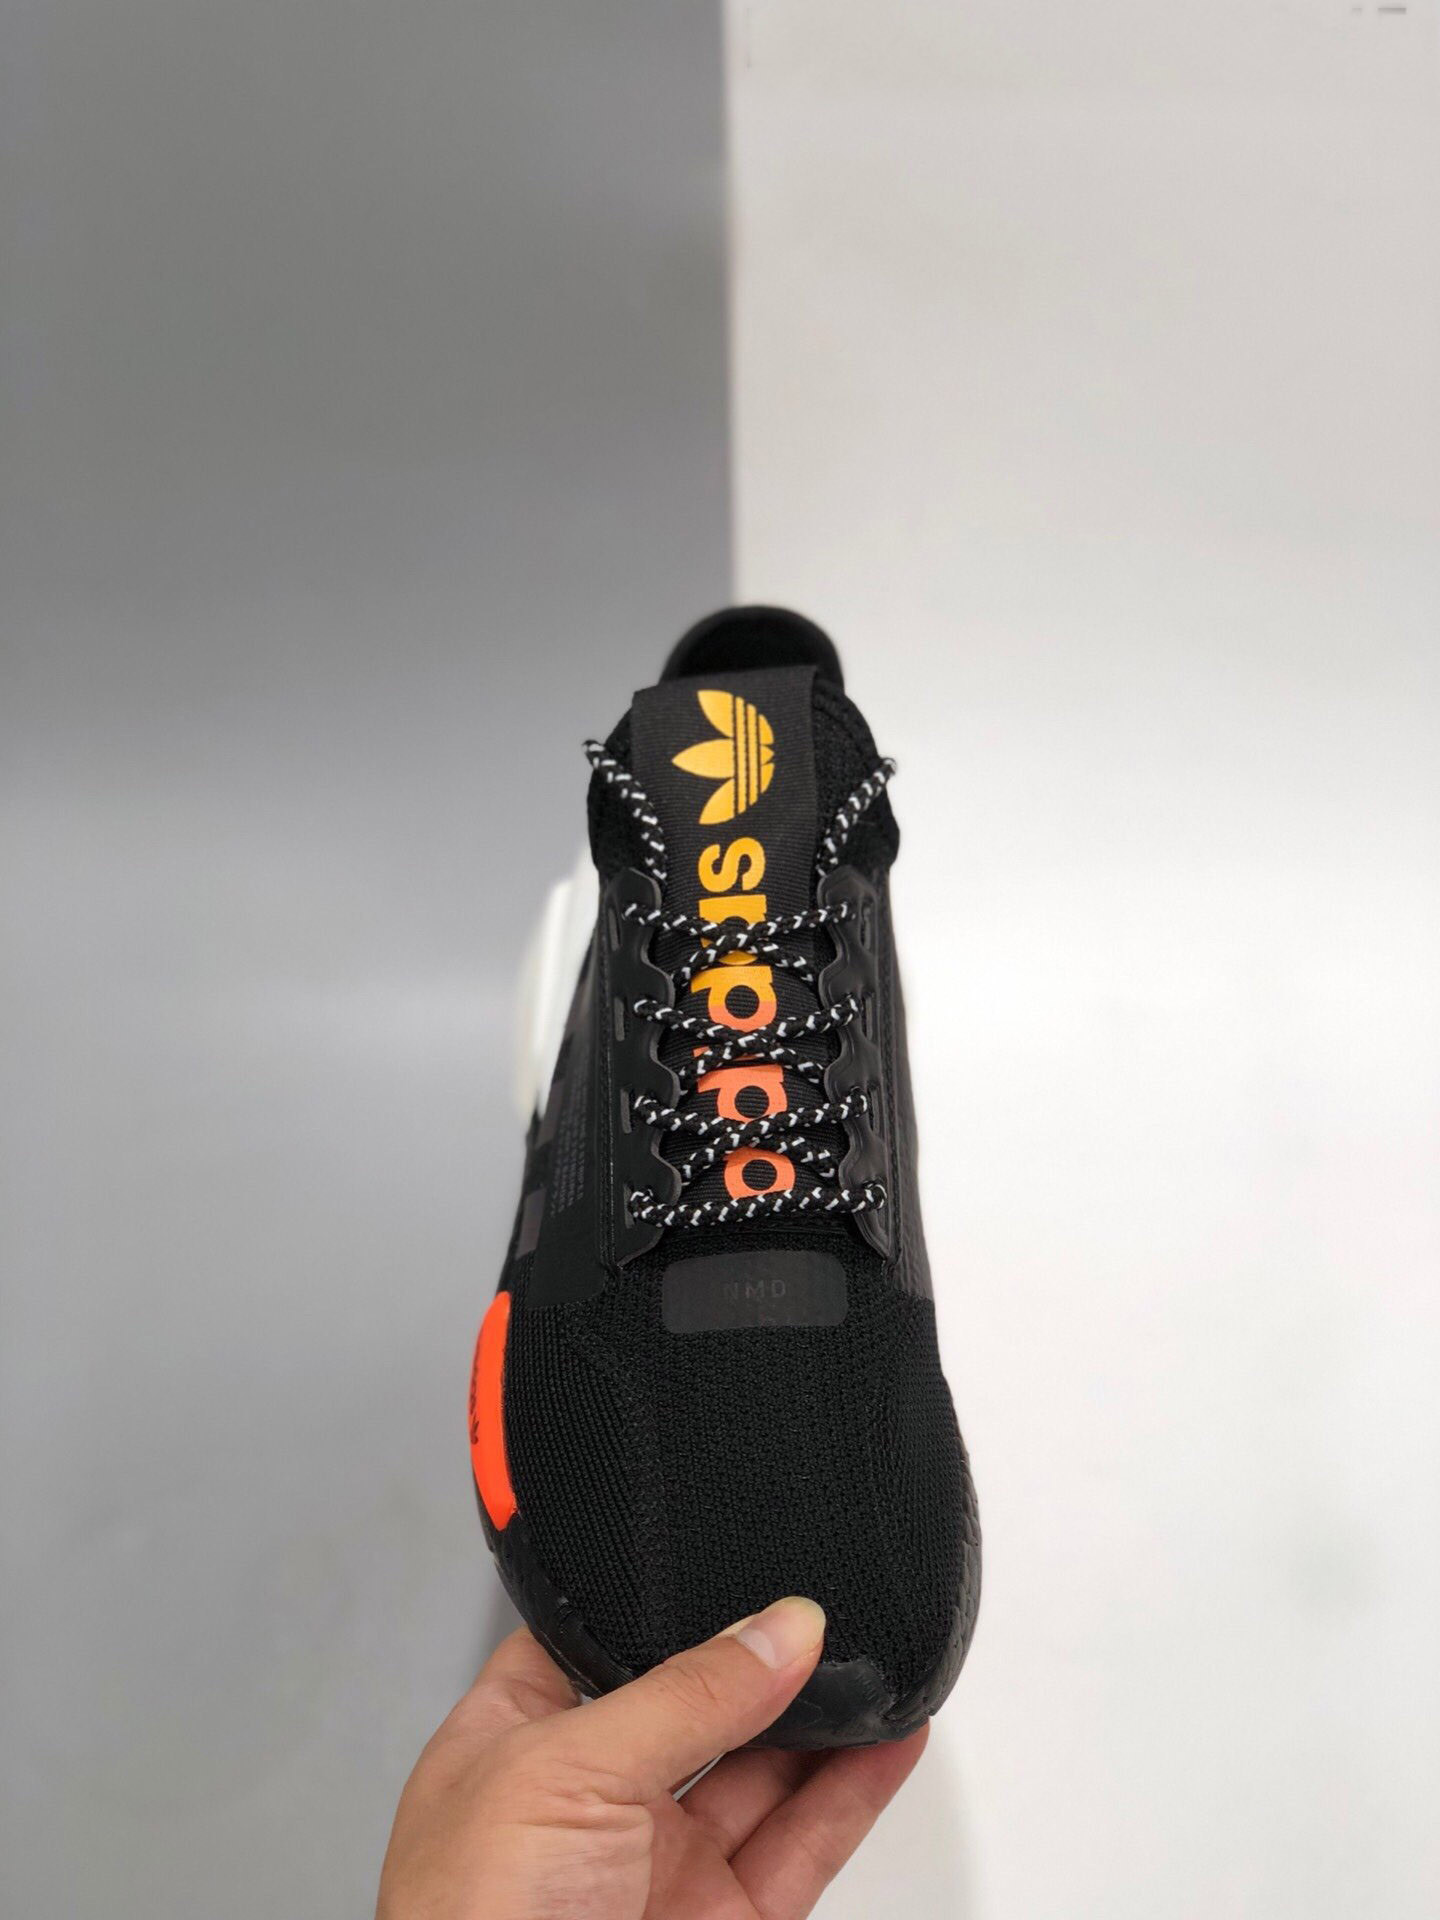 Adidas NMD R1 V2 Core Black Signal Coral FY3523 For Sale